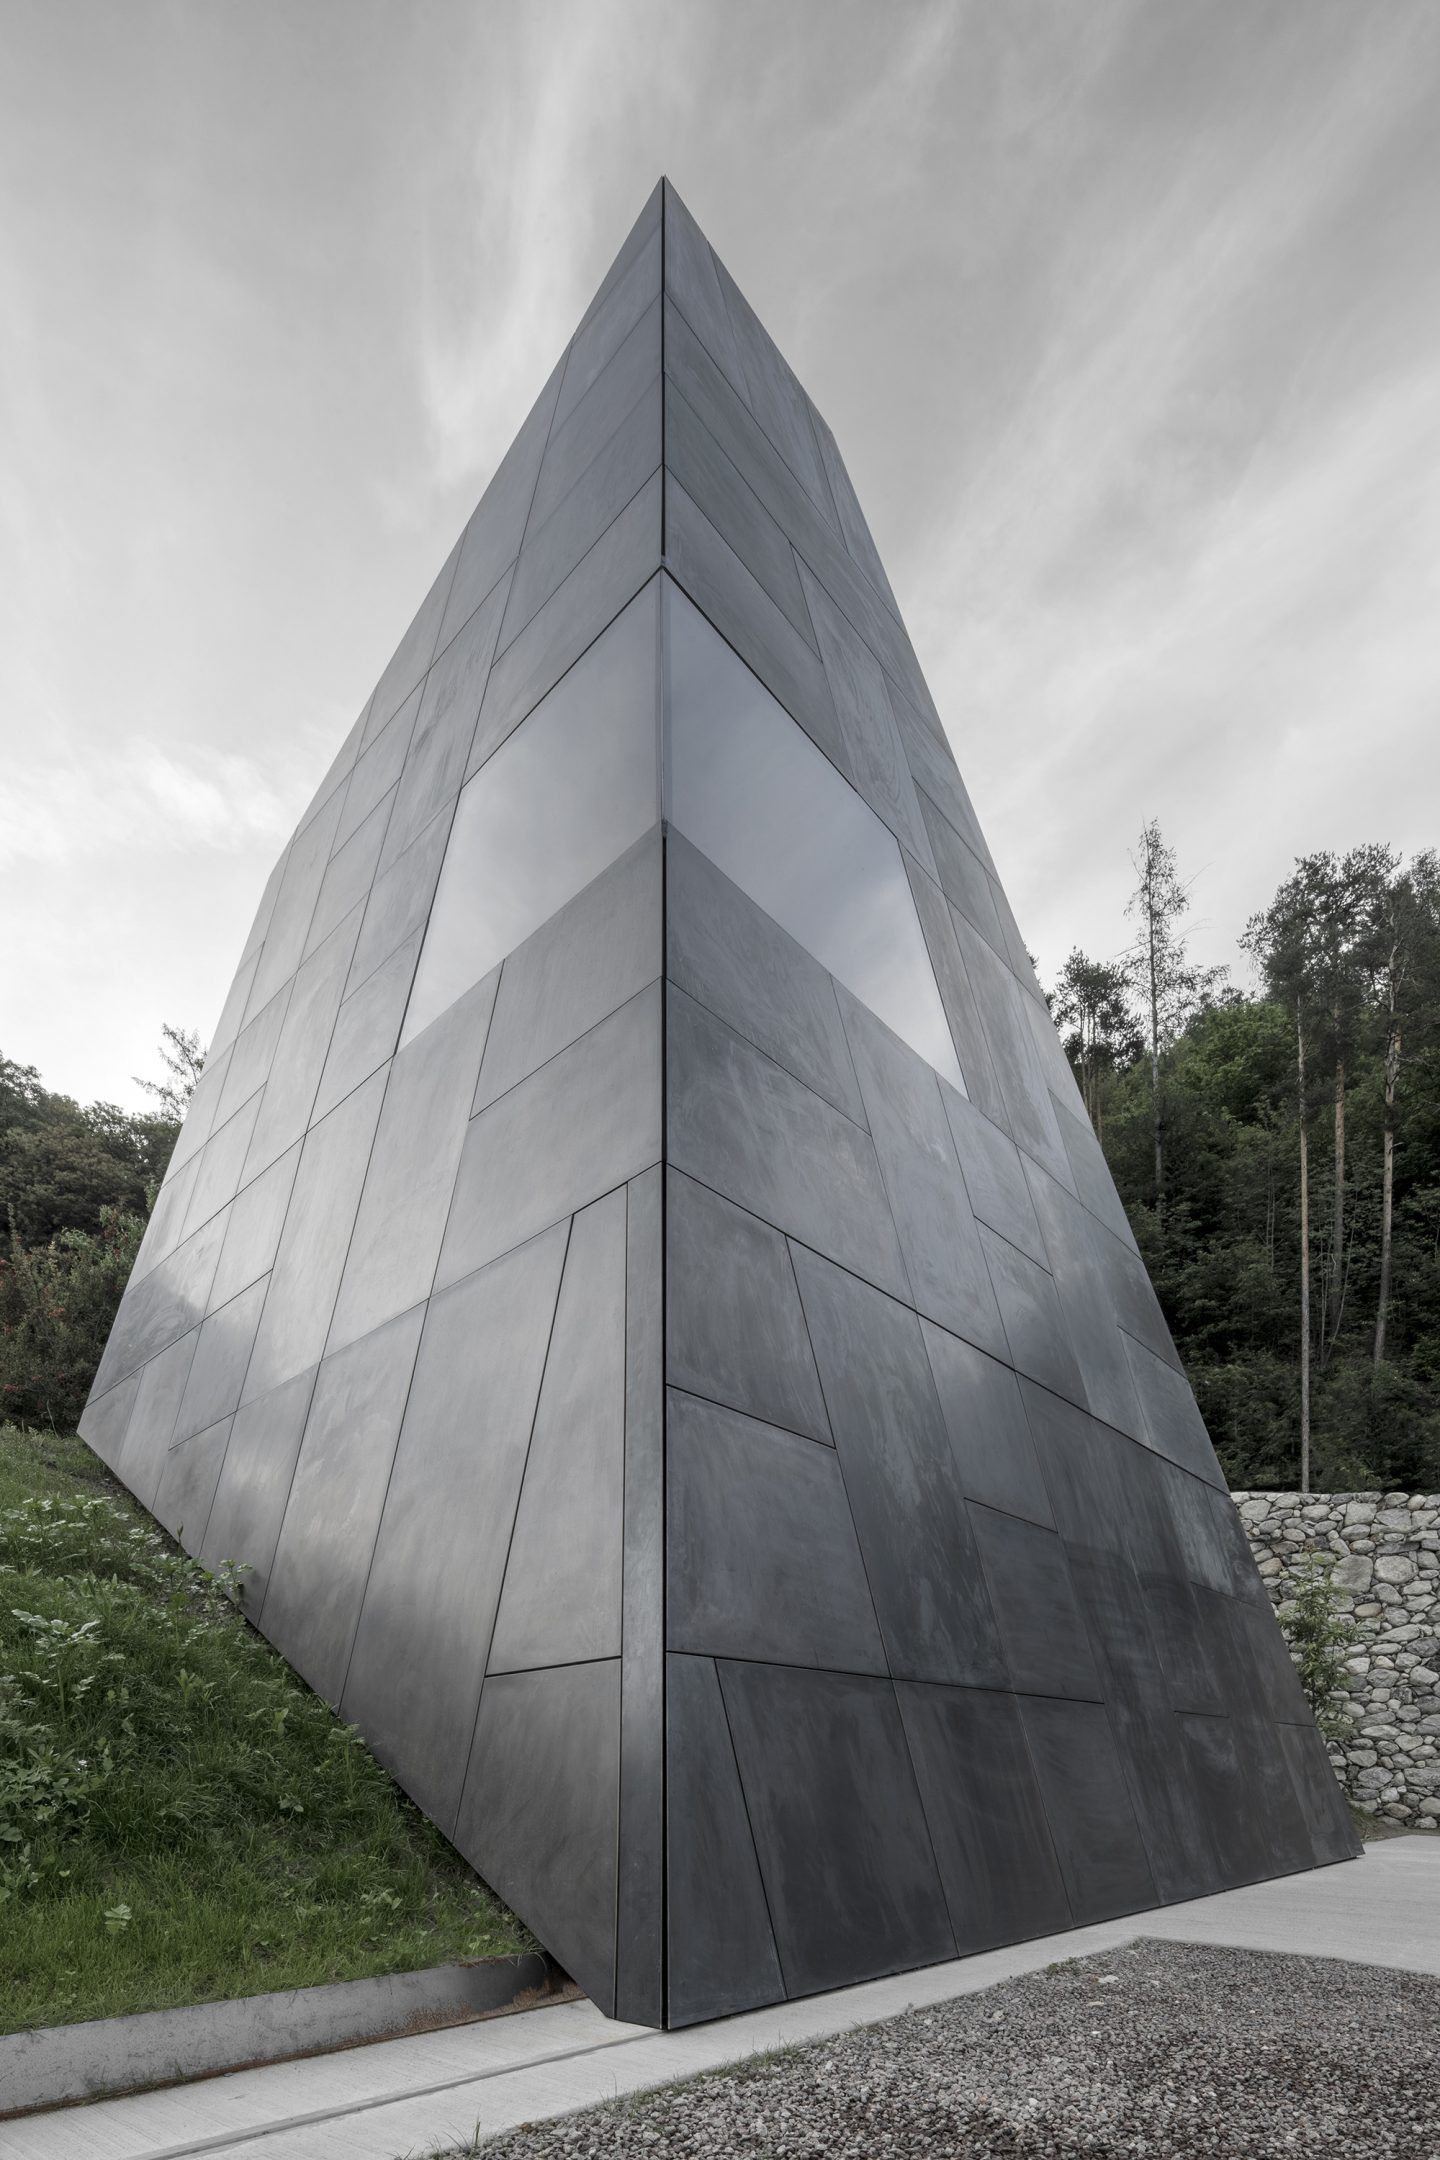 Beneath The Mountains Of Tyrol, This Wine Cellar's Geometric Form Bursts  Free From The Landscape - IGNANT